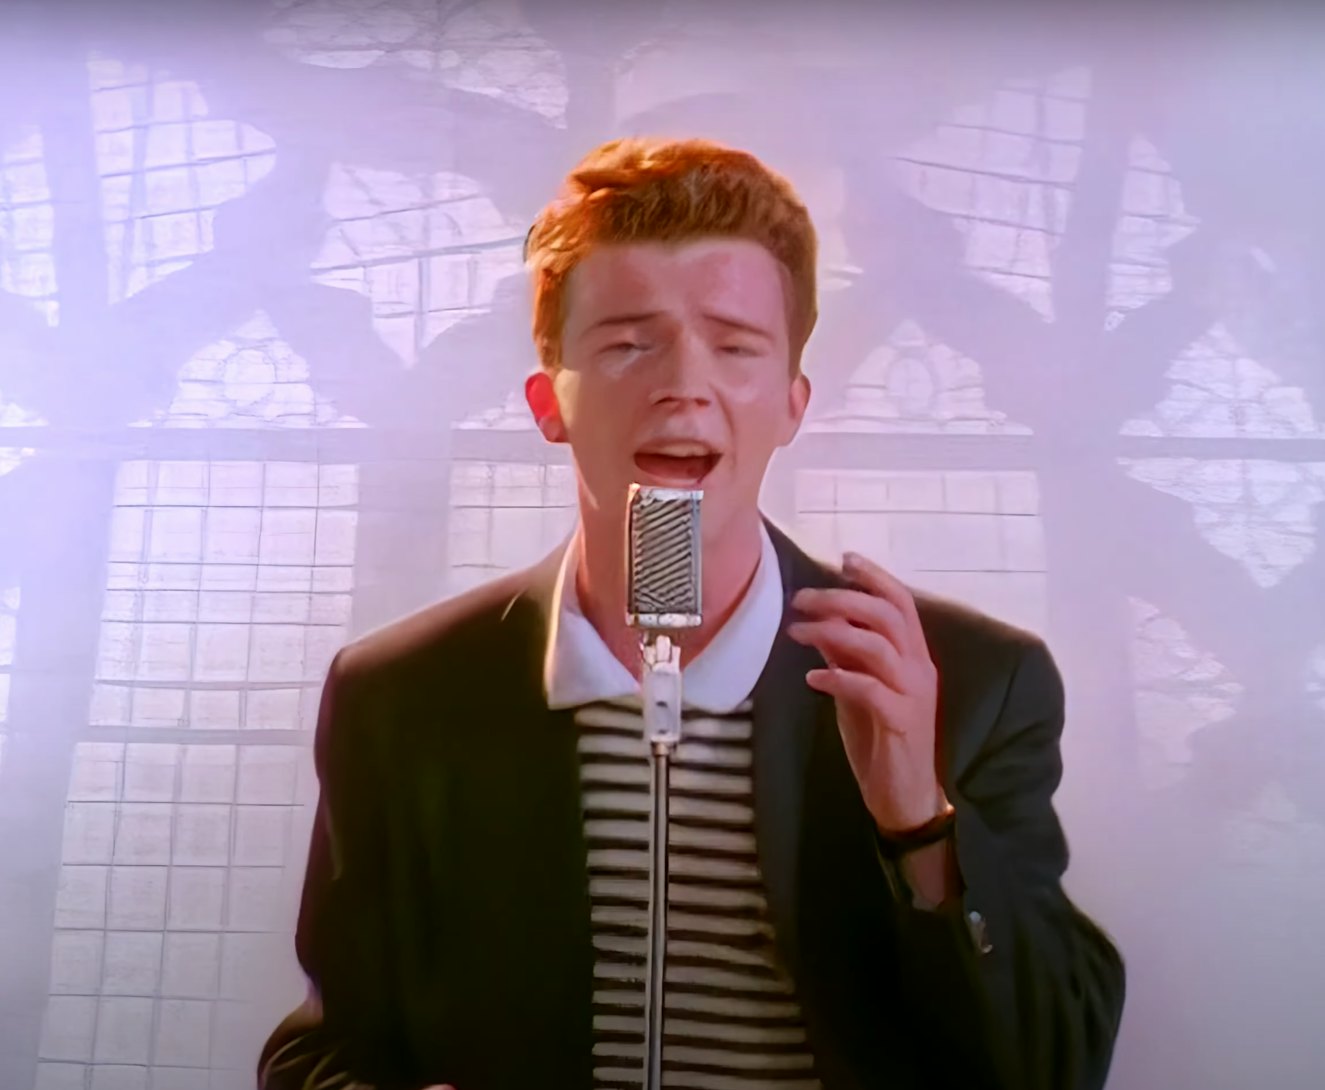 You've Just Been Rick Rolled! Never Gonna Give You Up by Rick Astley 